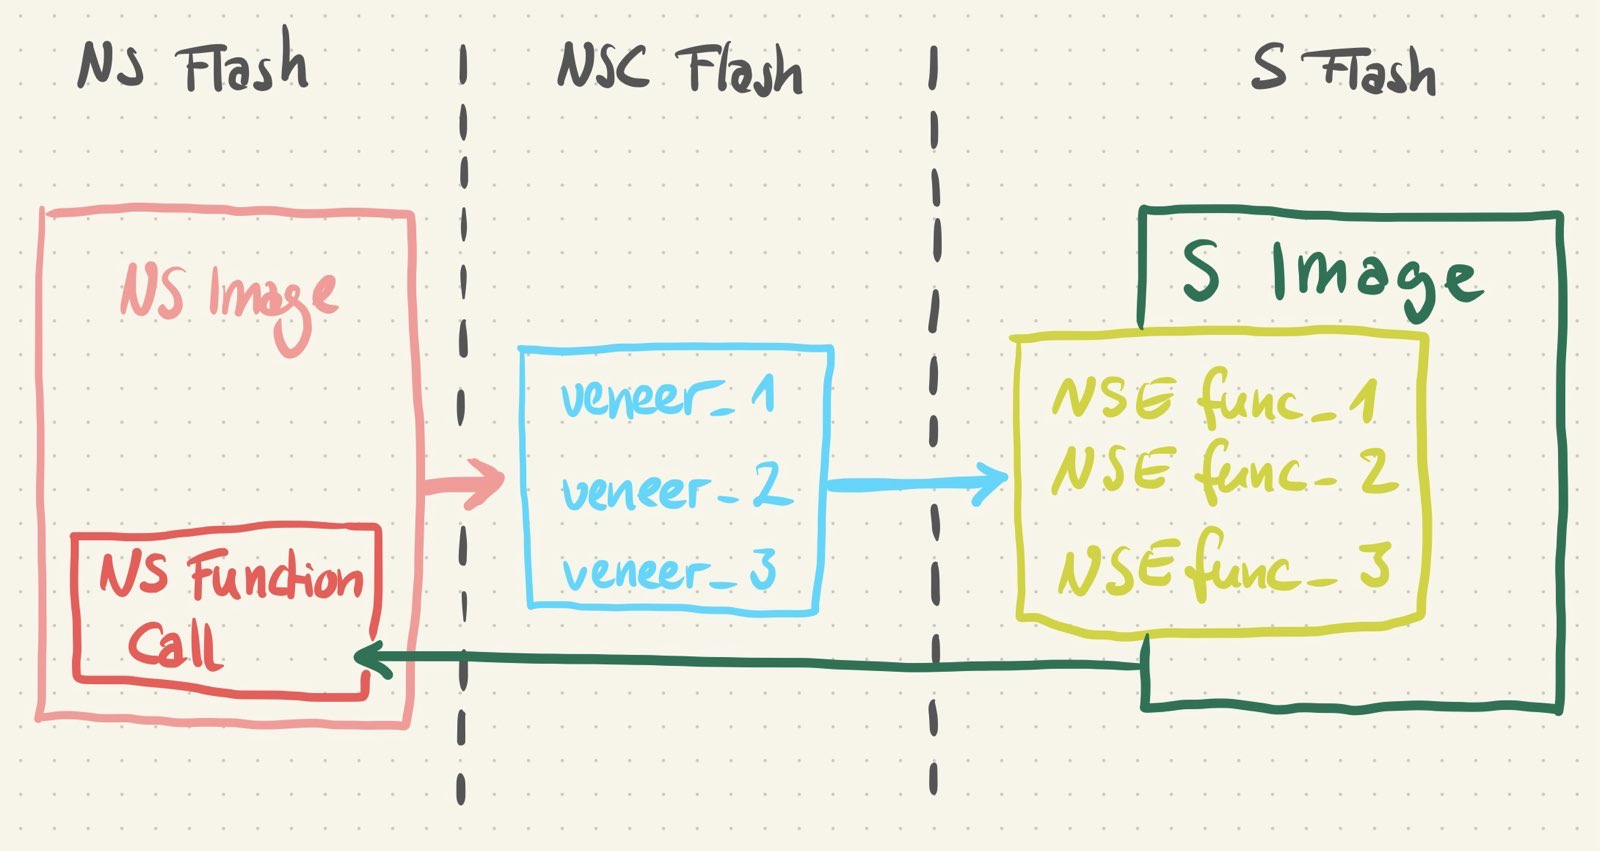 diagram: on the left a red box symbolizes the non-secure image in non-secure flash, on the right side there's a green box symbolizing the secure image with three secure entry functions. between them there is a blue box symbolizing the veneer functions. an arrow points from the non-secure box to the veneers, a second arrow points from the veneers to the secure box and a third arrow points from the secure box directly to the non-secure box.